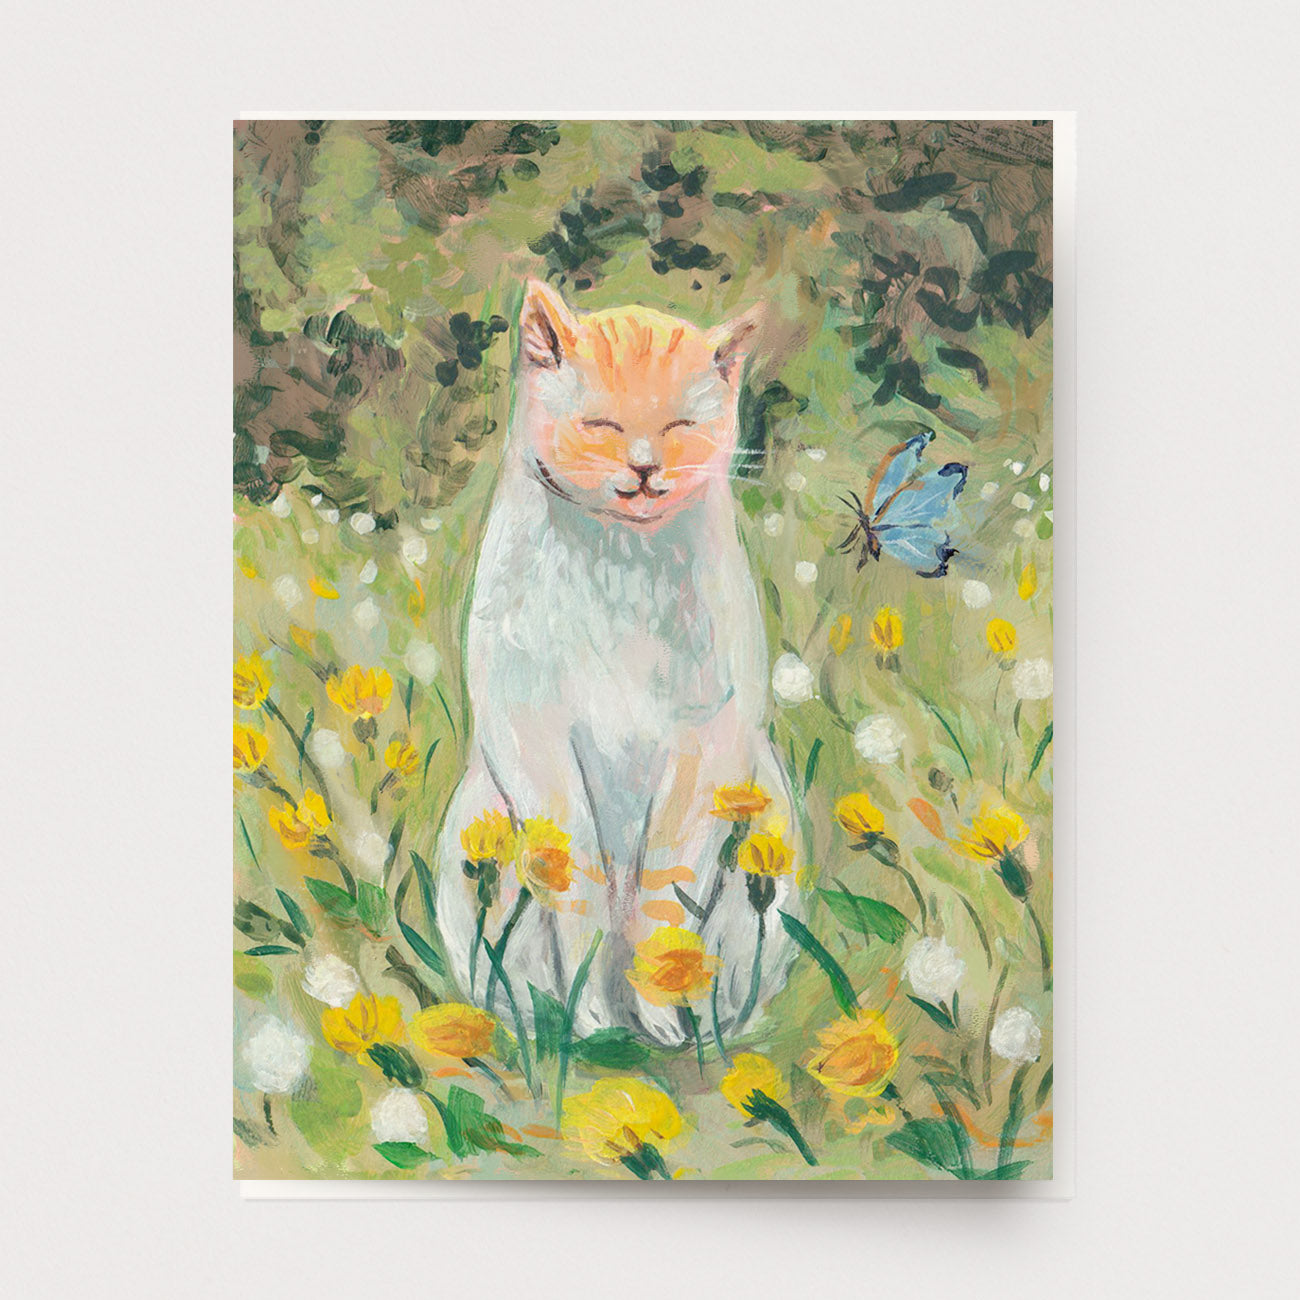 Greeting card of a cat sitting in a field of dandelions with a butterfly, Ingrid Press made in the USA